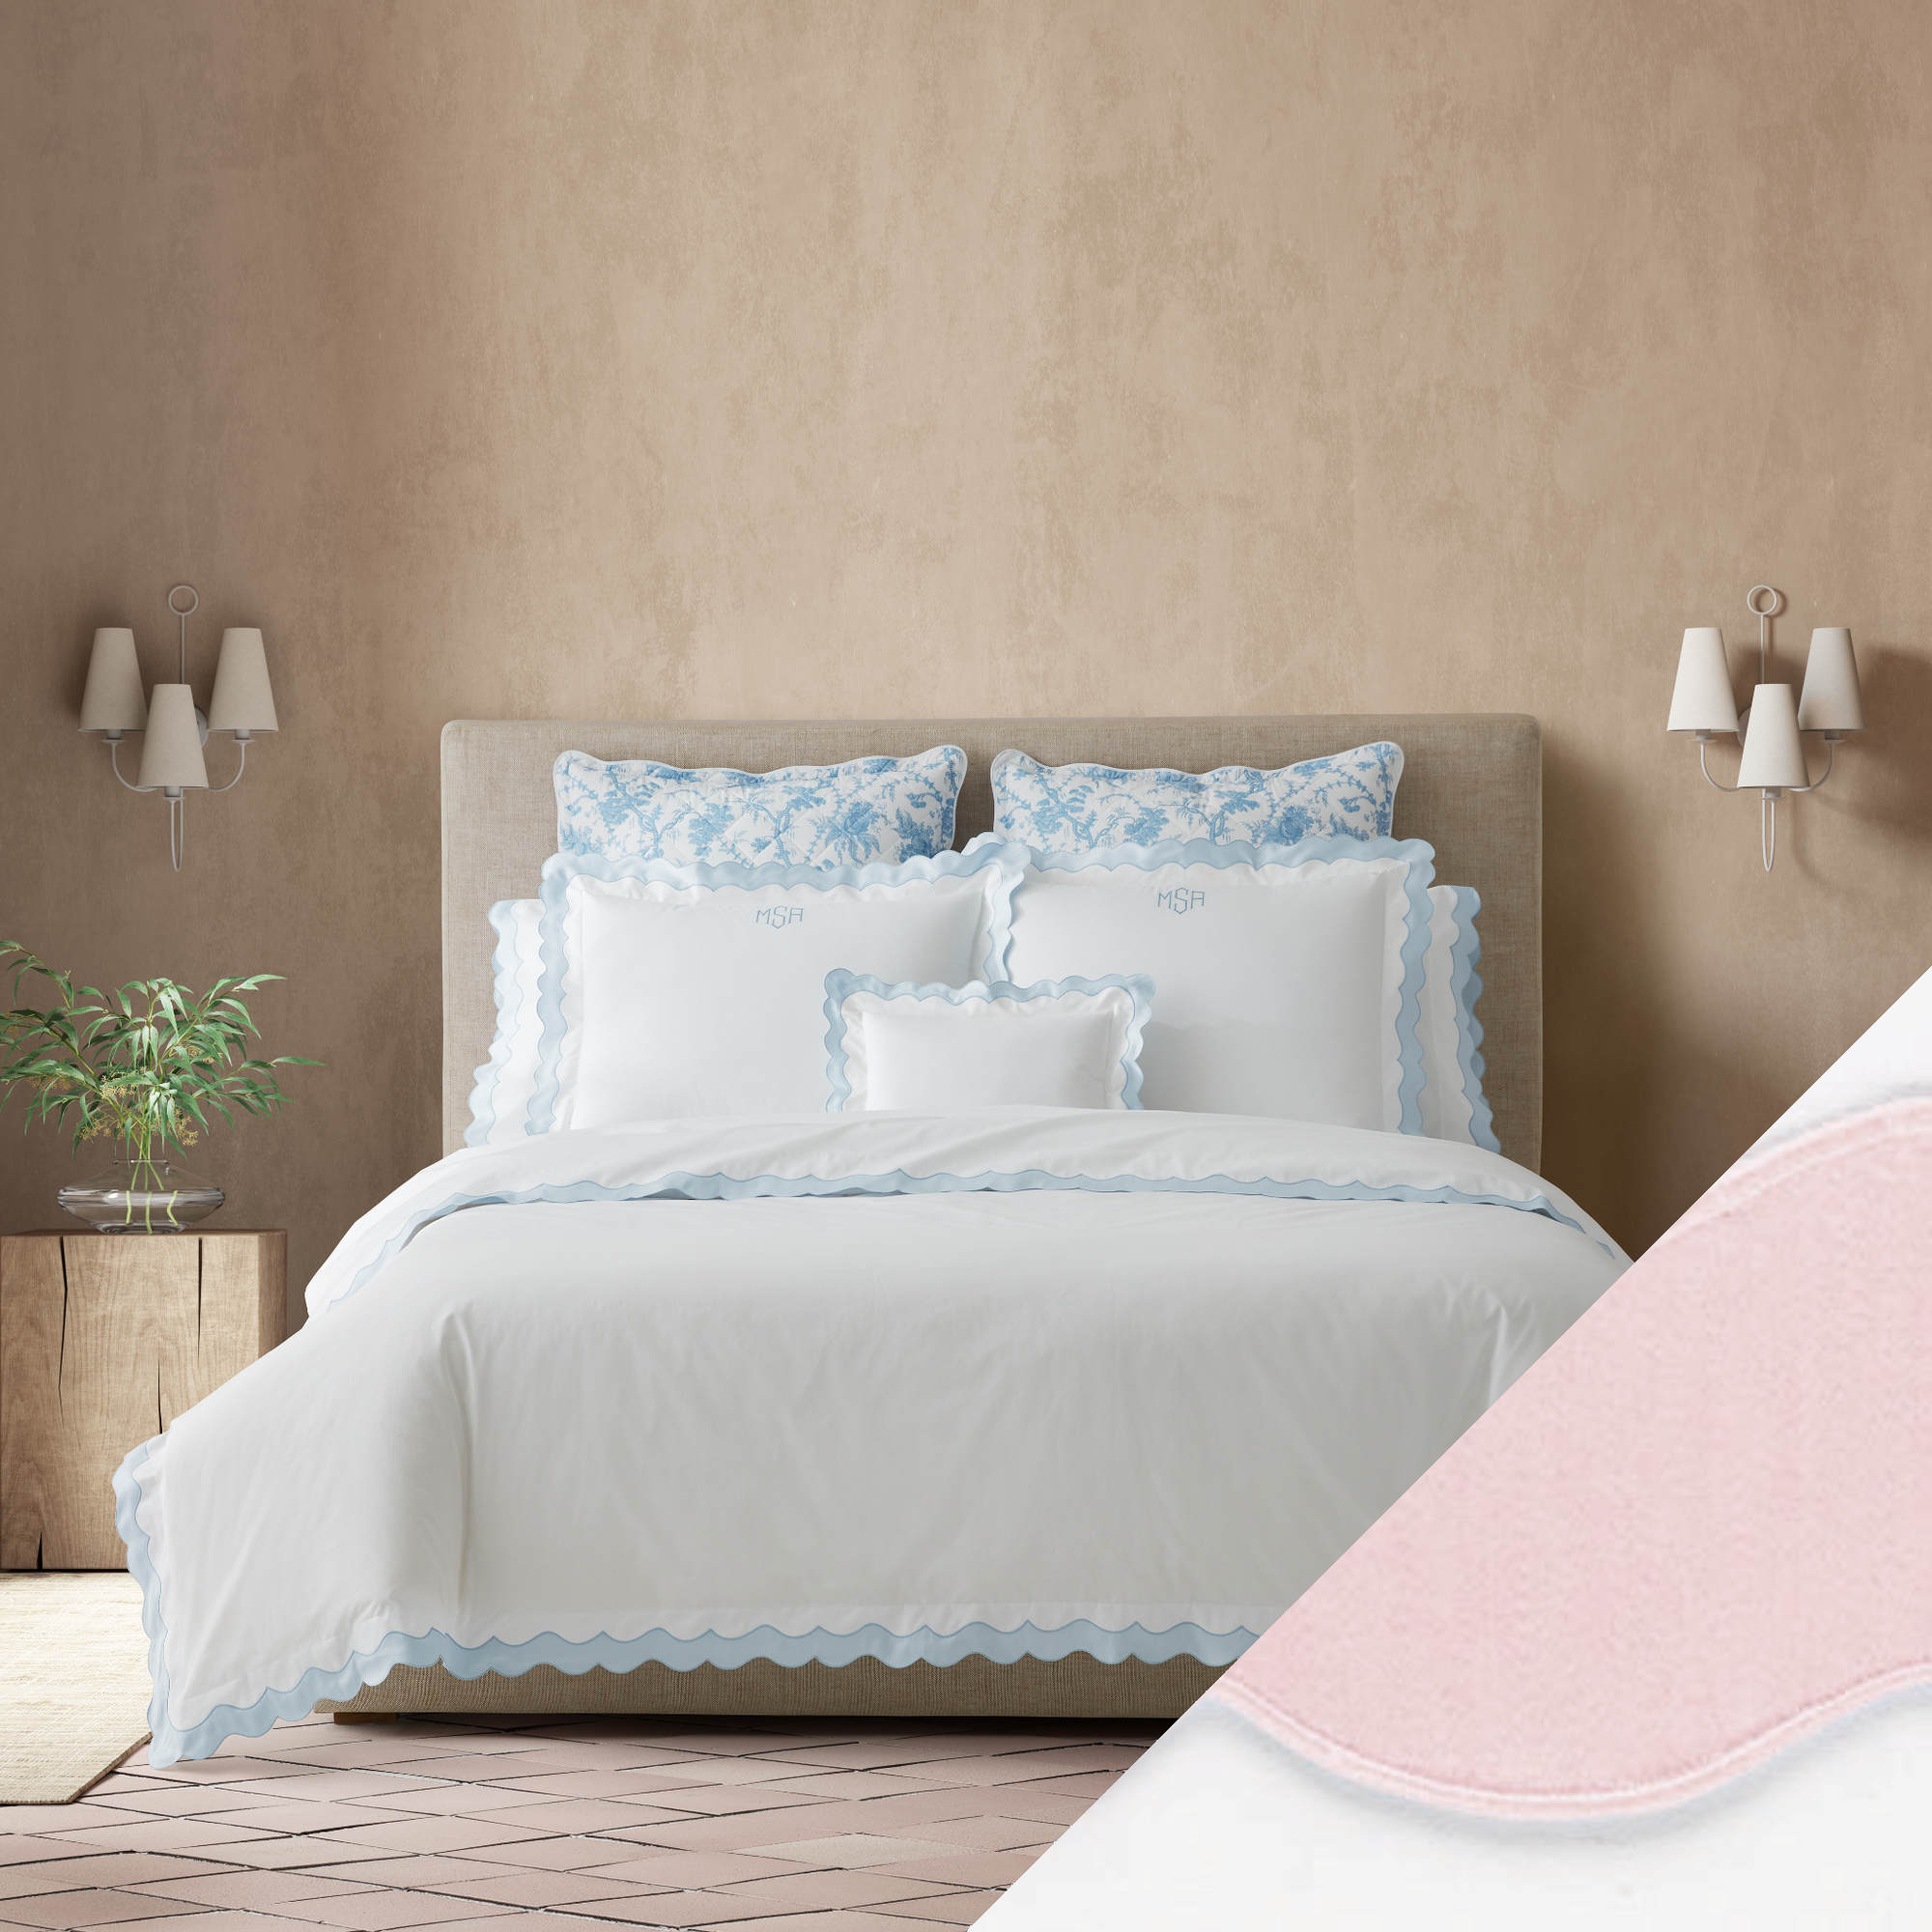 Full Bed Dressed in Matouk Lorelei Bedding in Blue Color with Pink Swatch